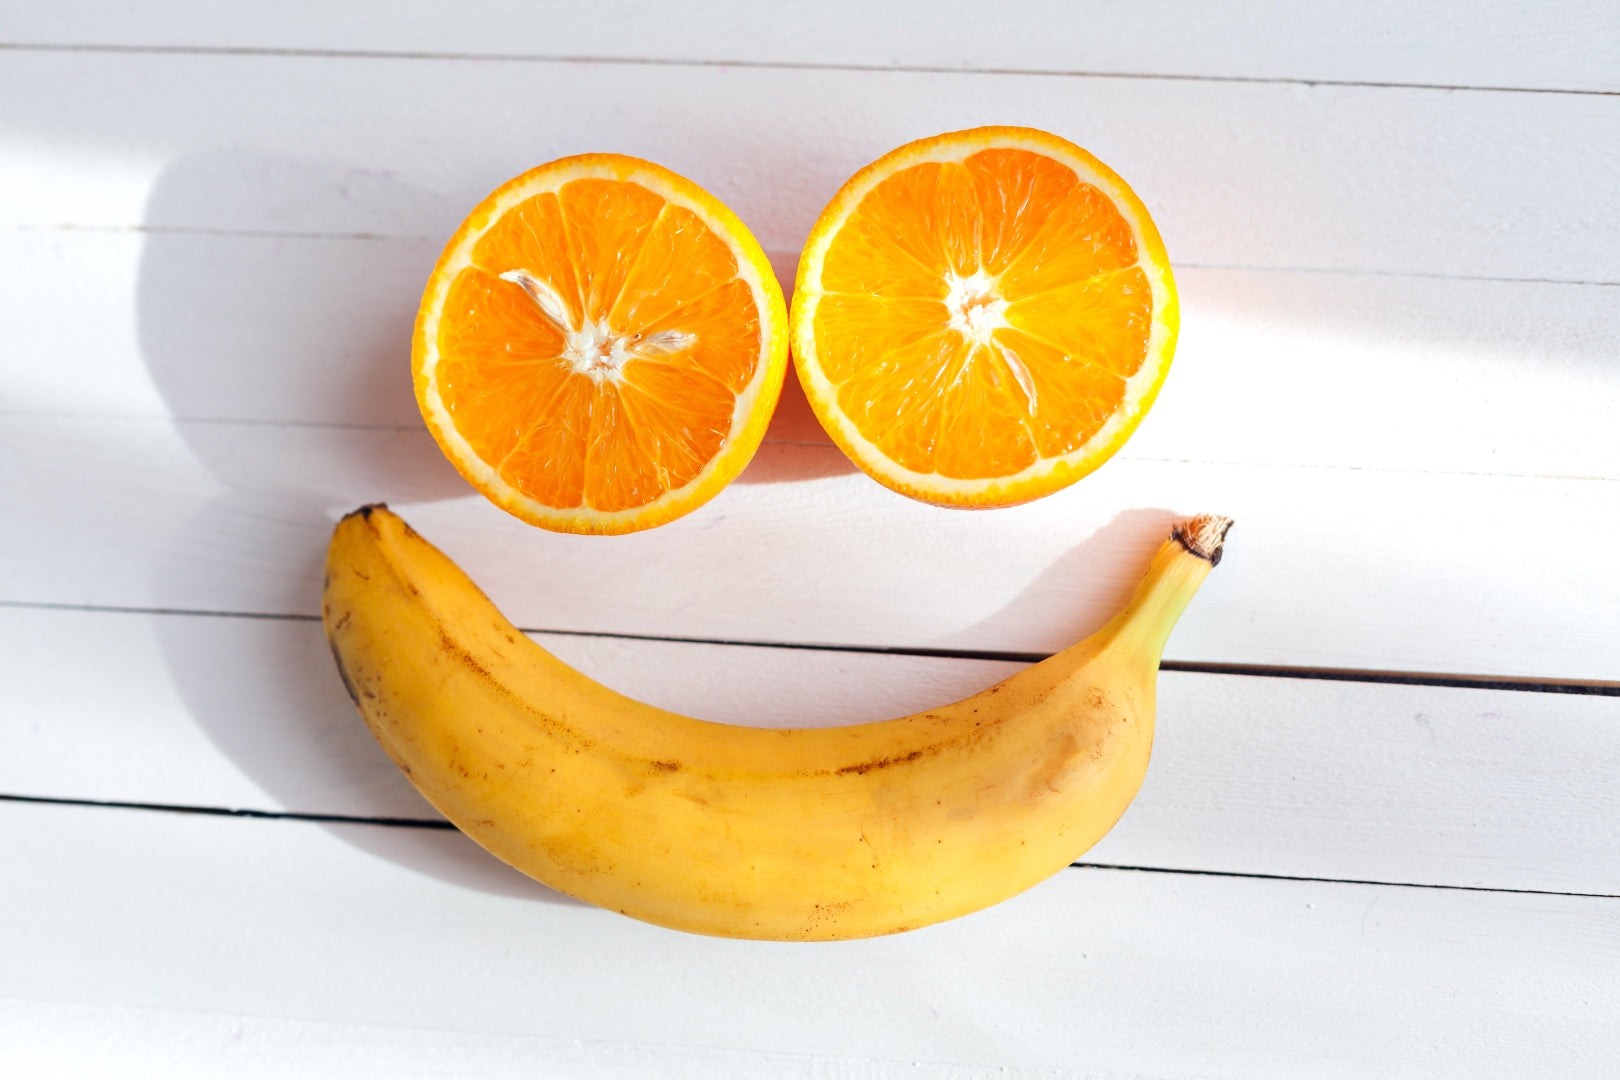 A smily face made from a banana and halved orange against a white wooden table